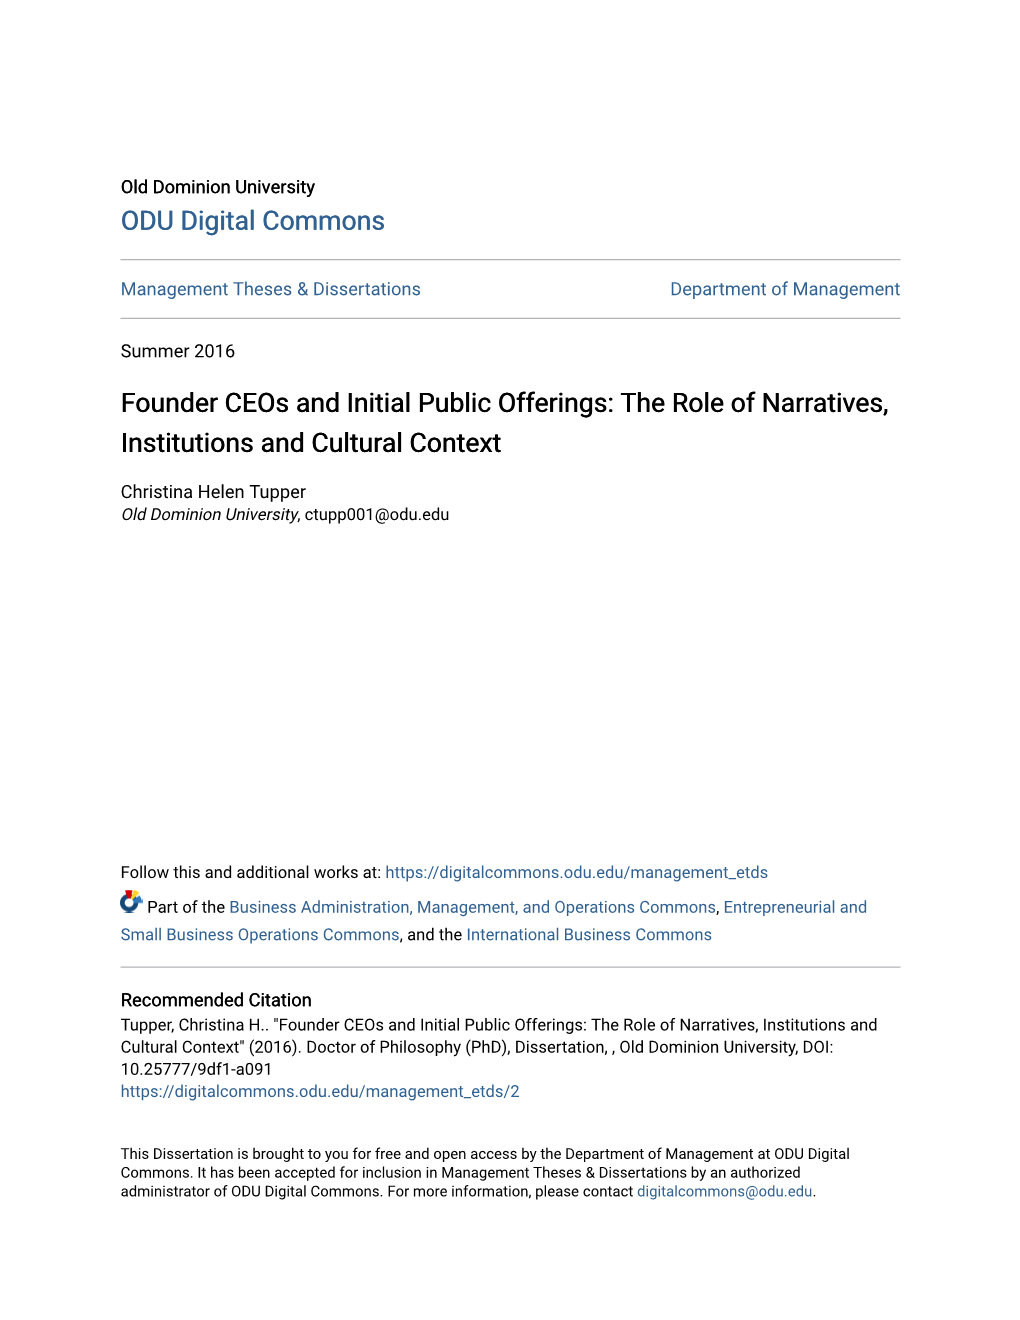 Founder Ceos and Initial Public Offerings: the Role of Narratives, Institutions and Cultural Context